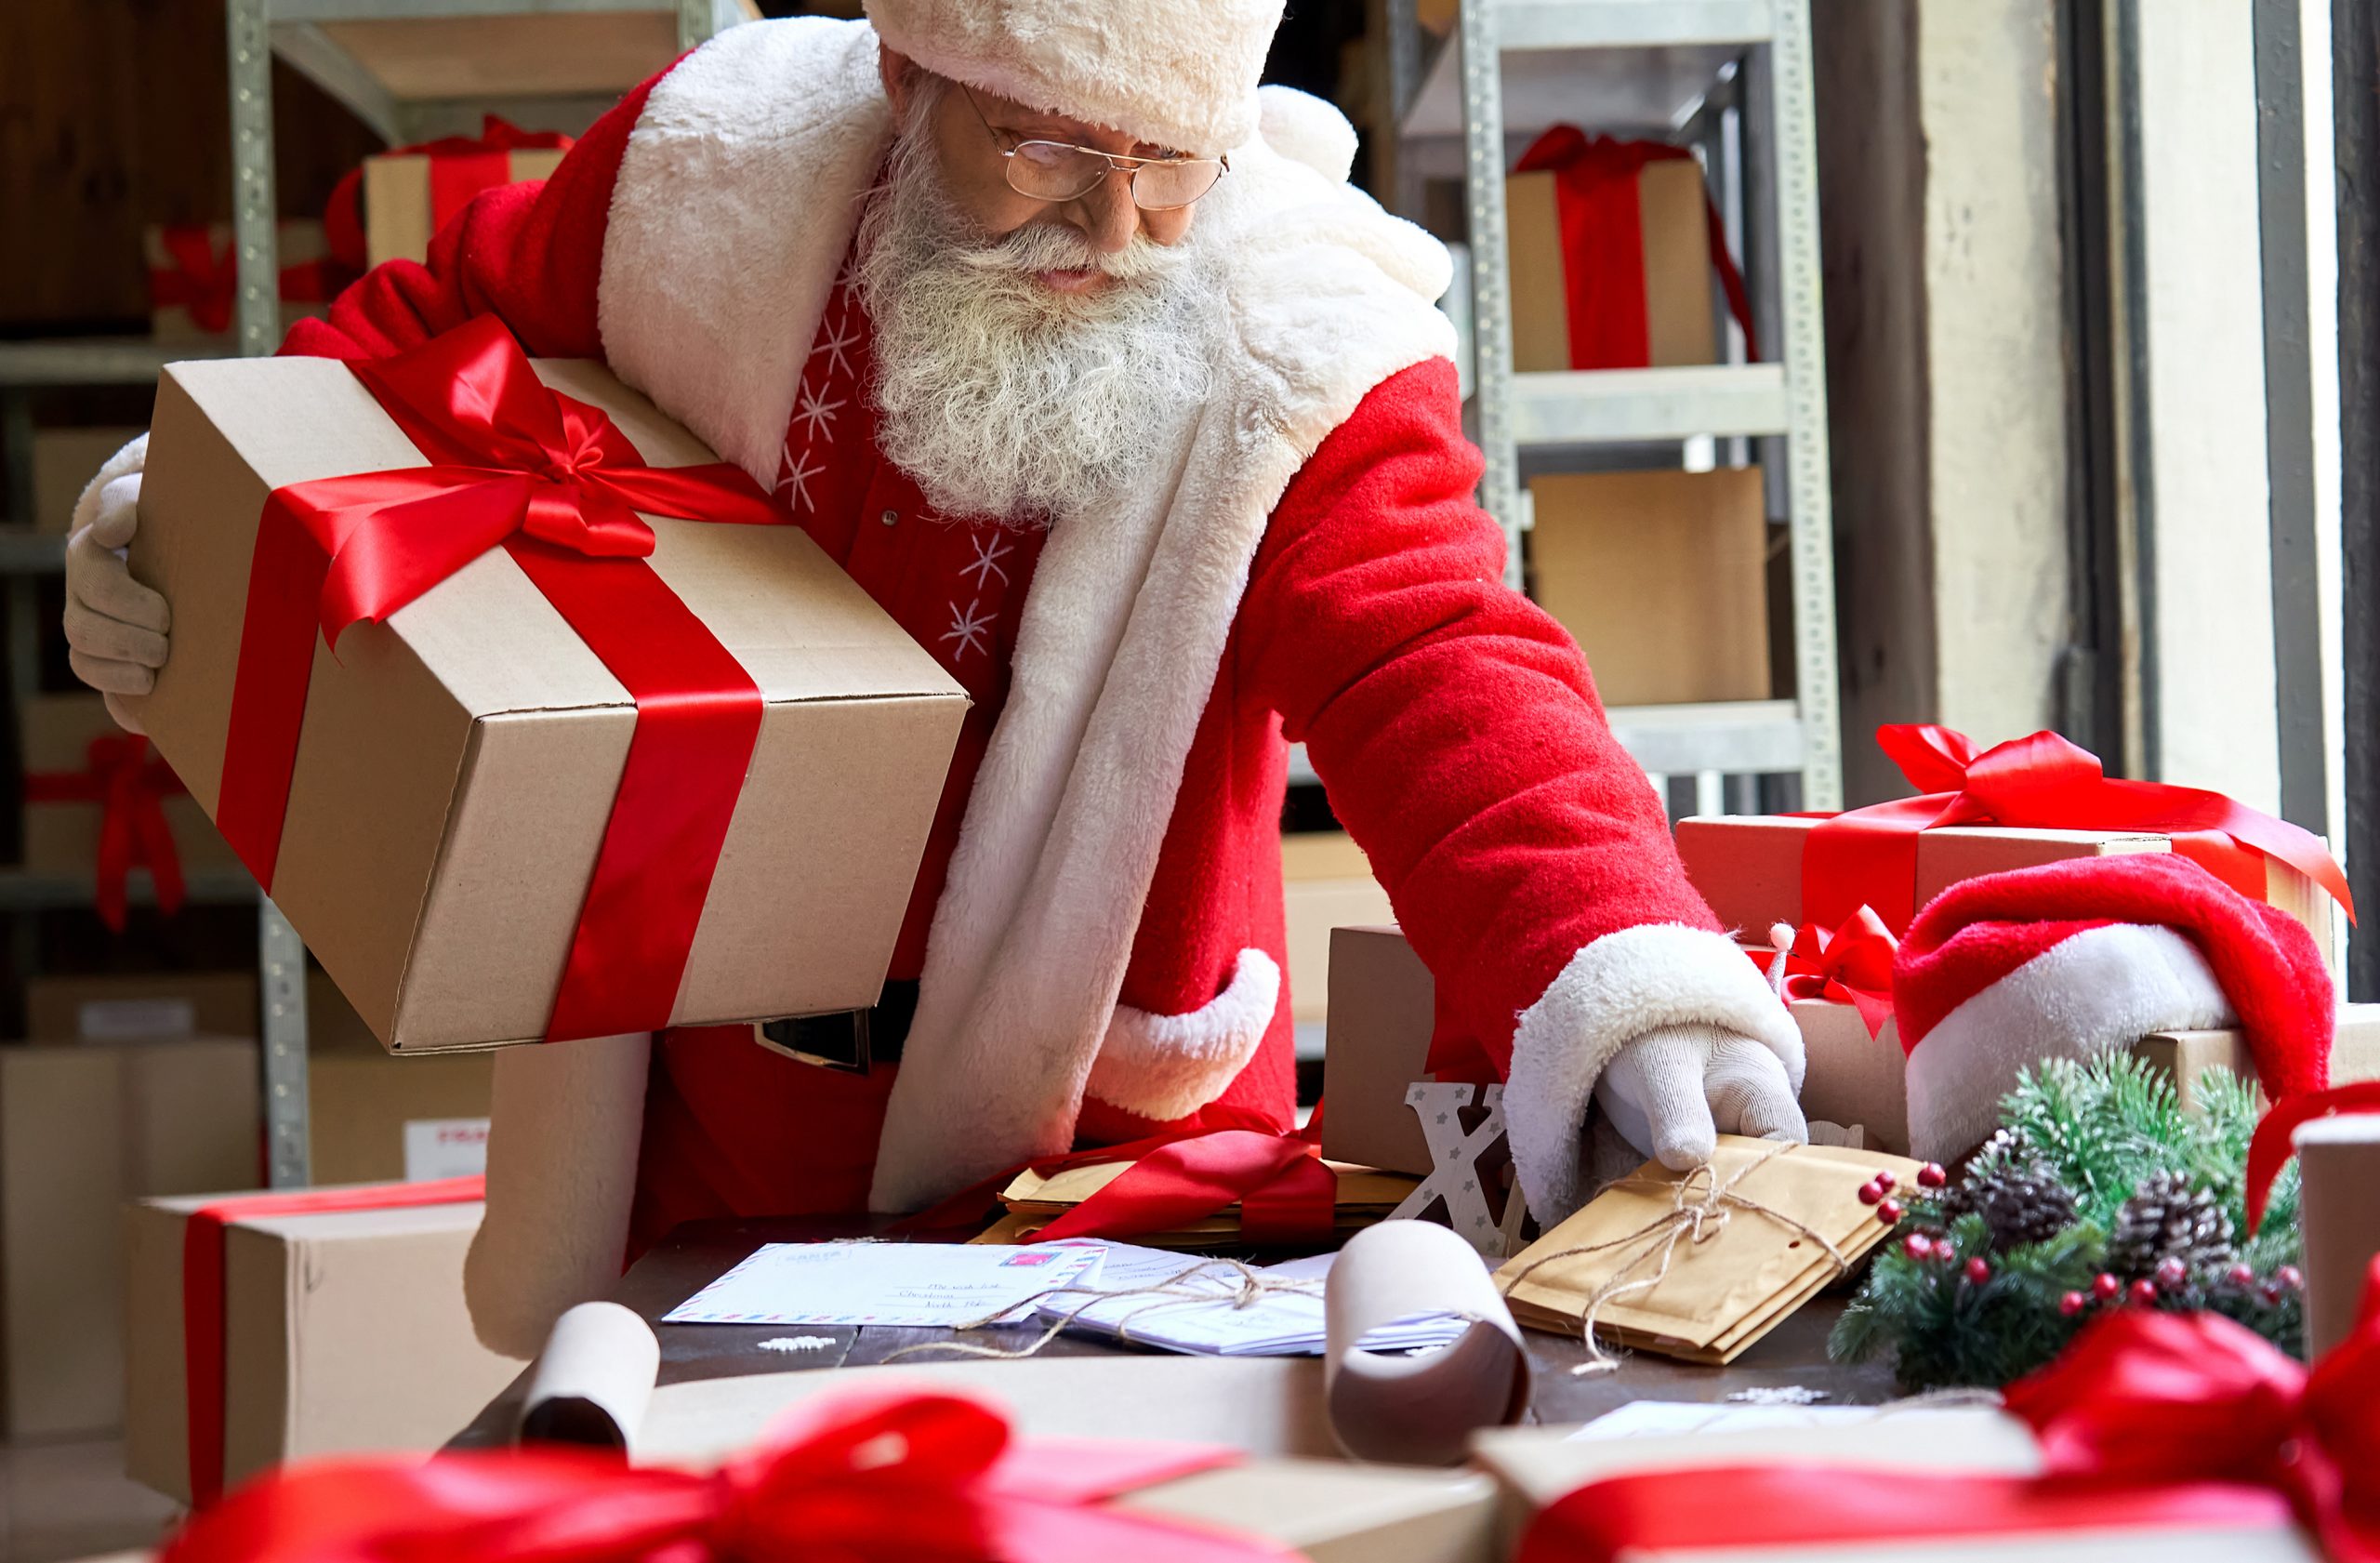 As the holiday season approaches, major shipping and delivery companies have revealed their deadlines for Christmas, Hanukkah, and Kwanzaa.